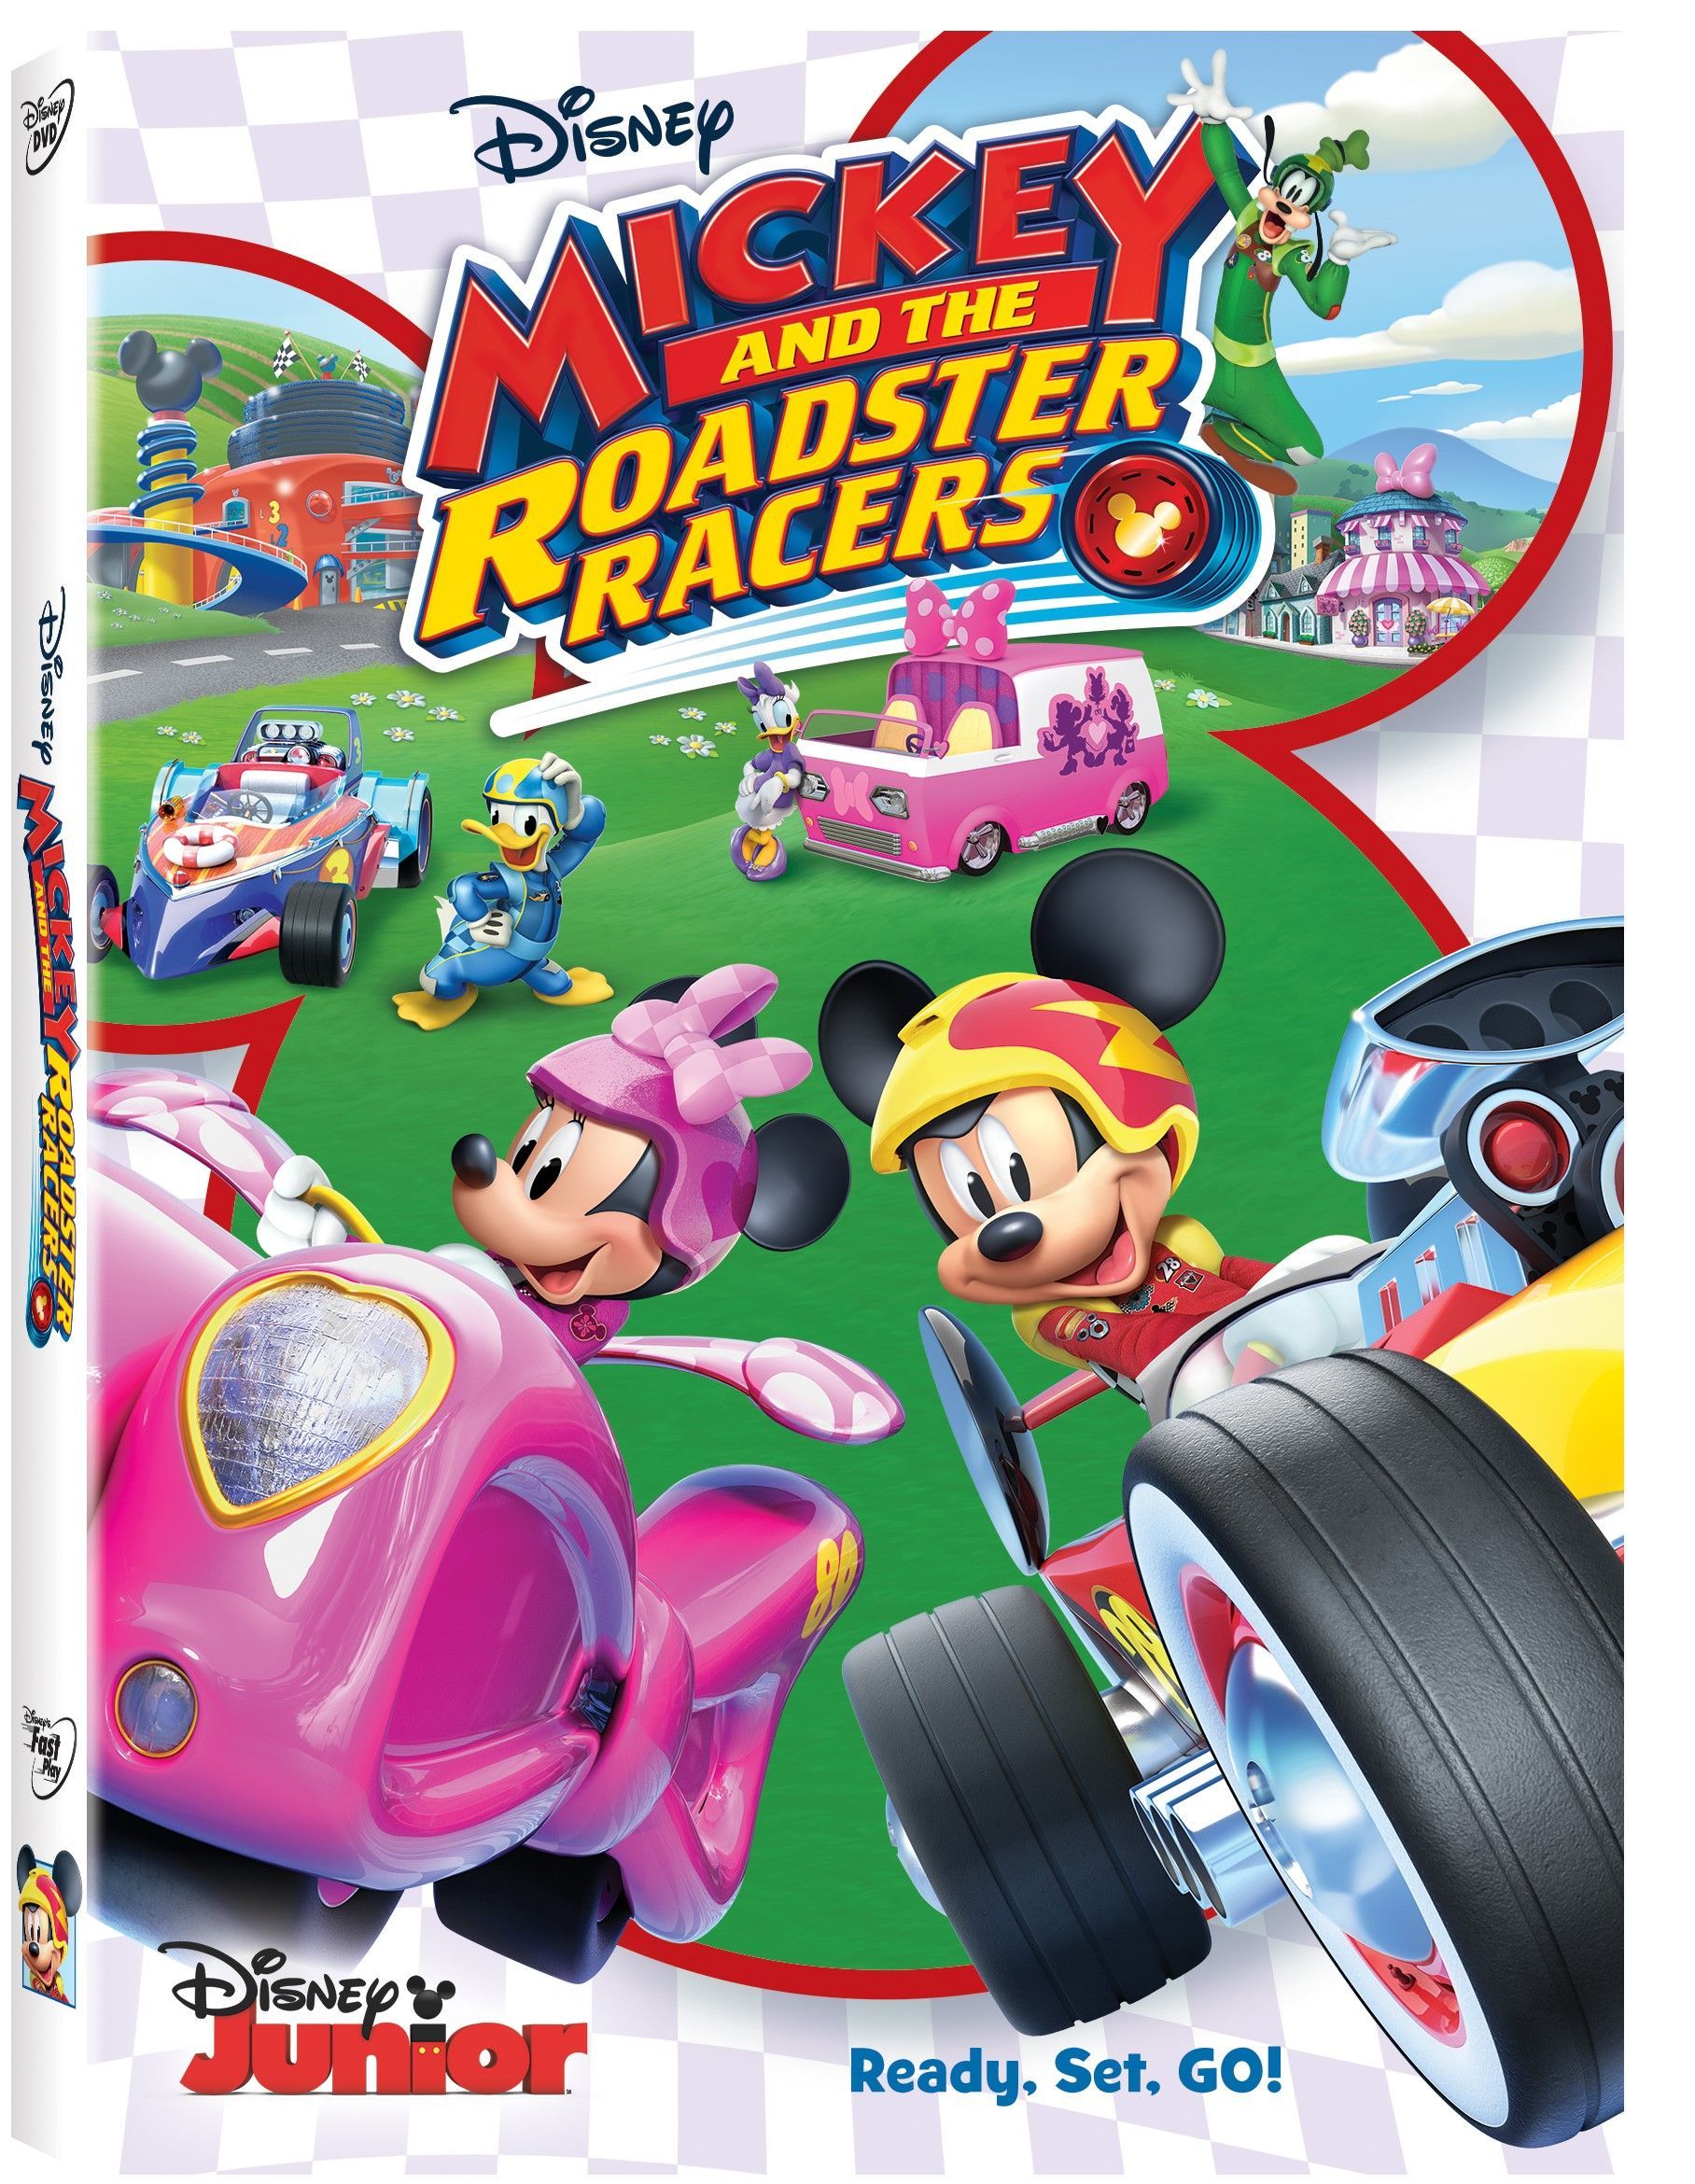 Mickey and the Roadster Racers Available on Disney DVD March 7th. Mickey, Mickey roadster racers, Disney mickey